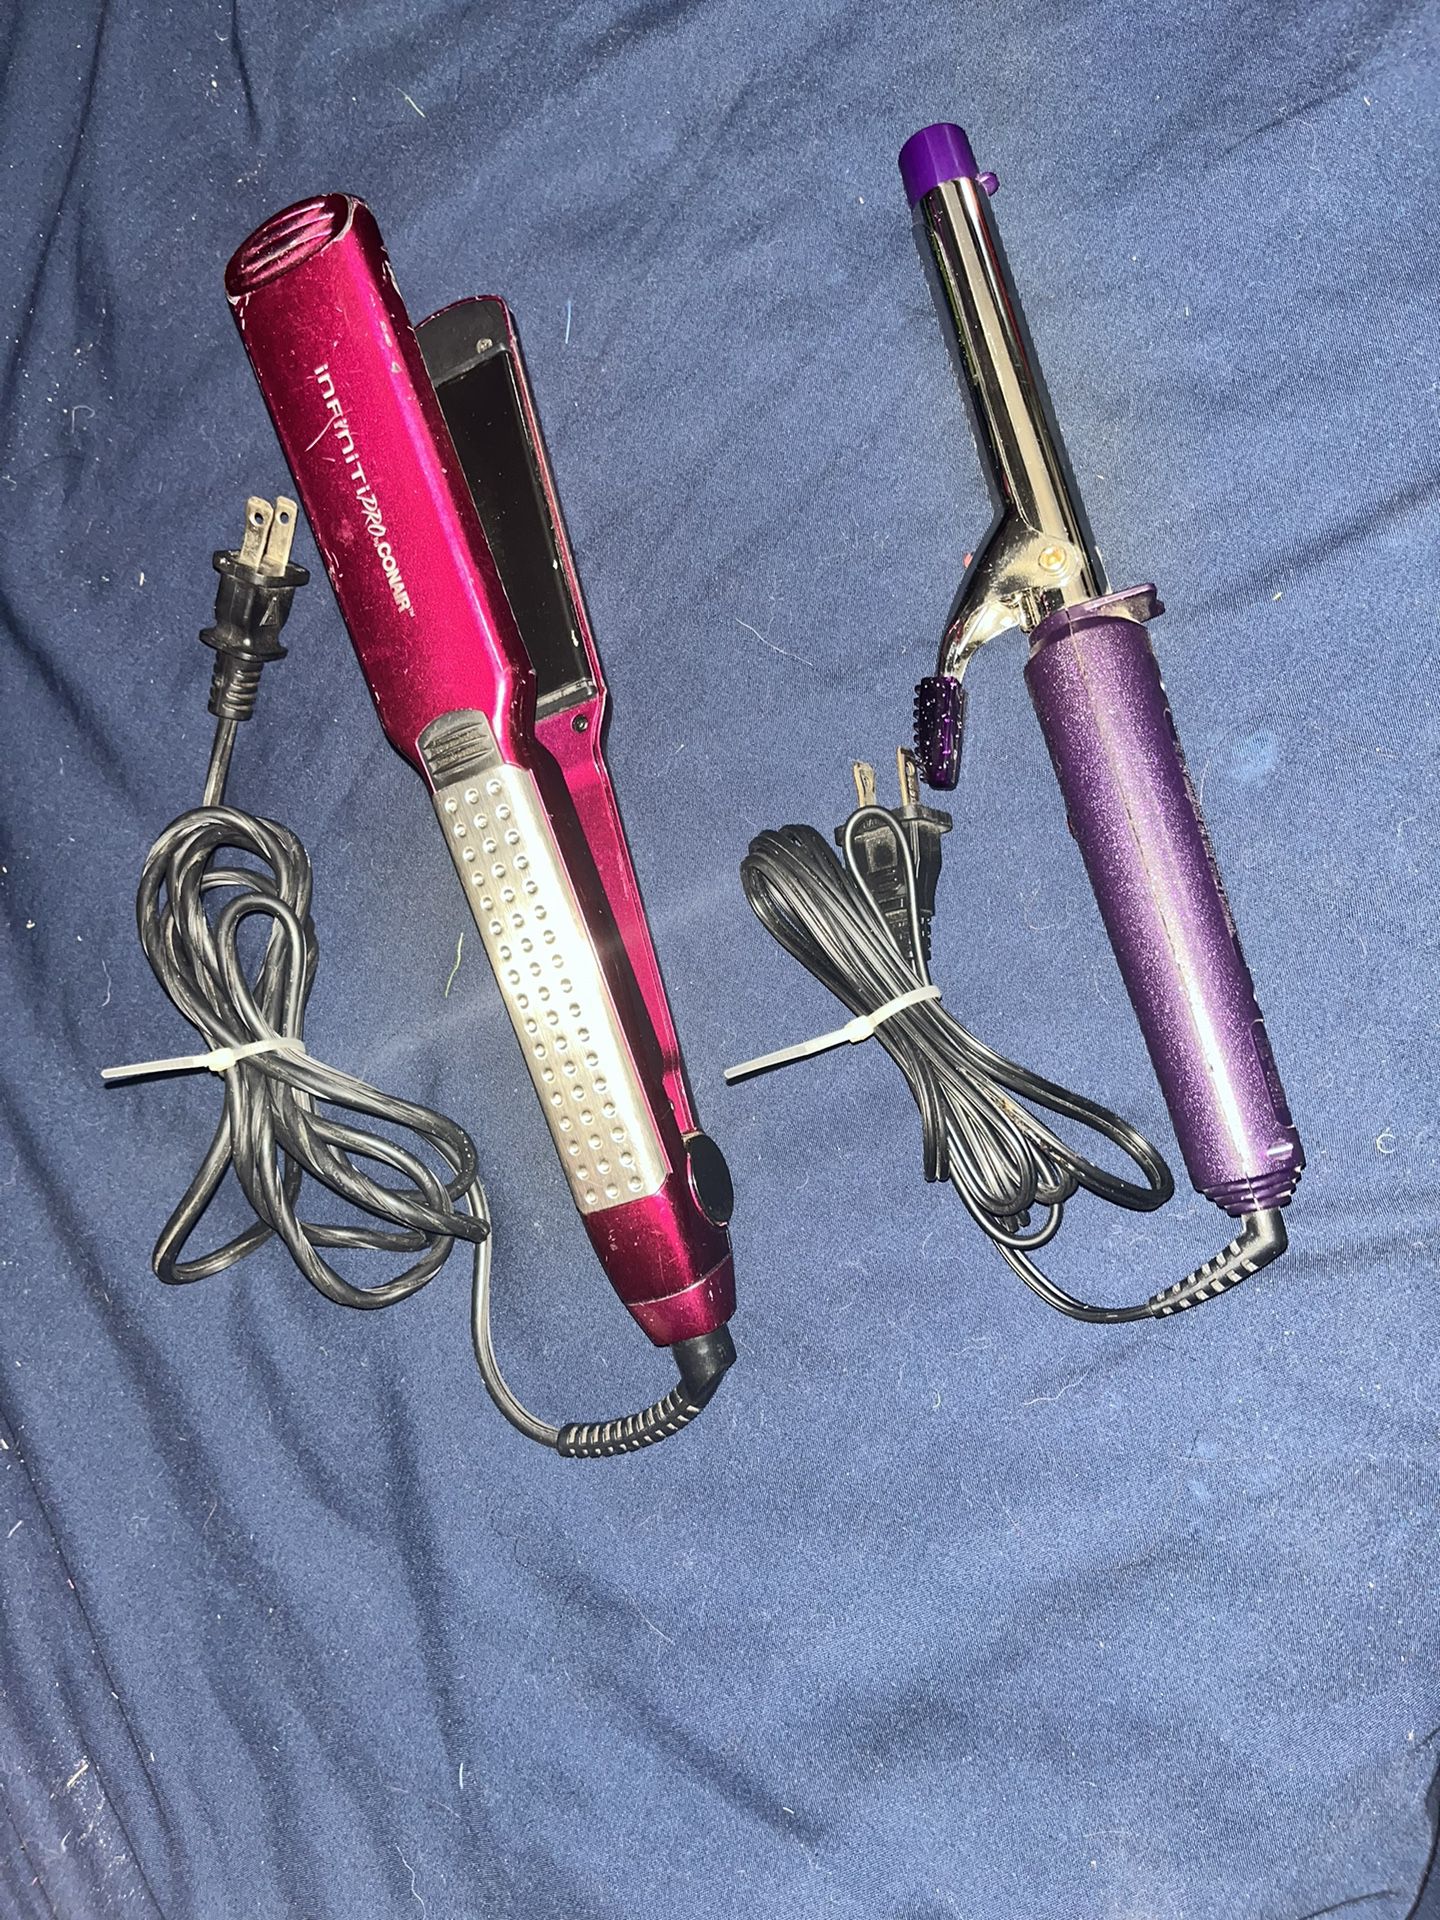 Hair Straightener And Curling Iron Tools